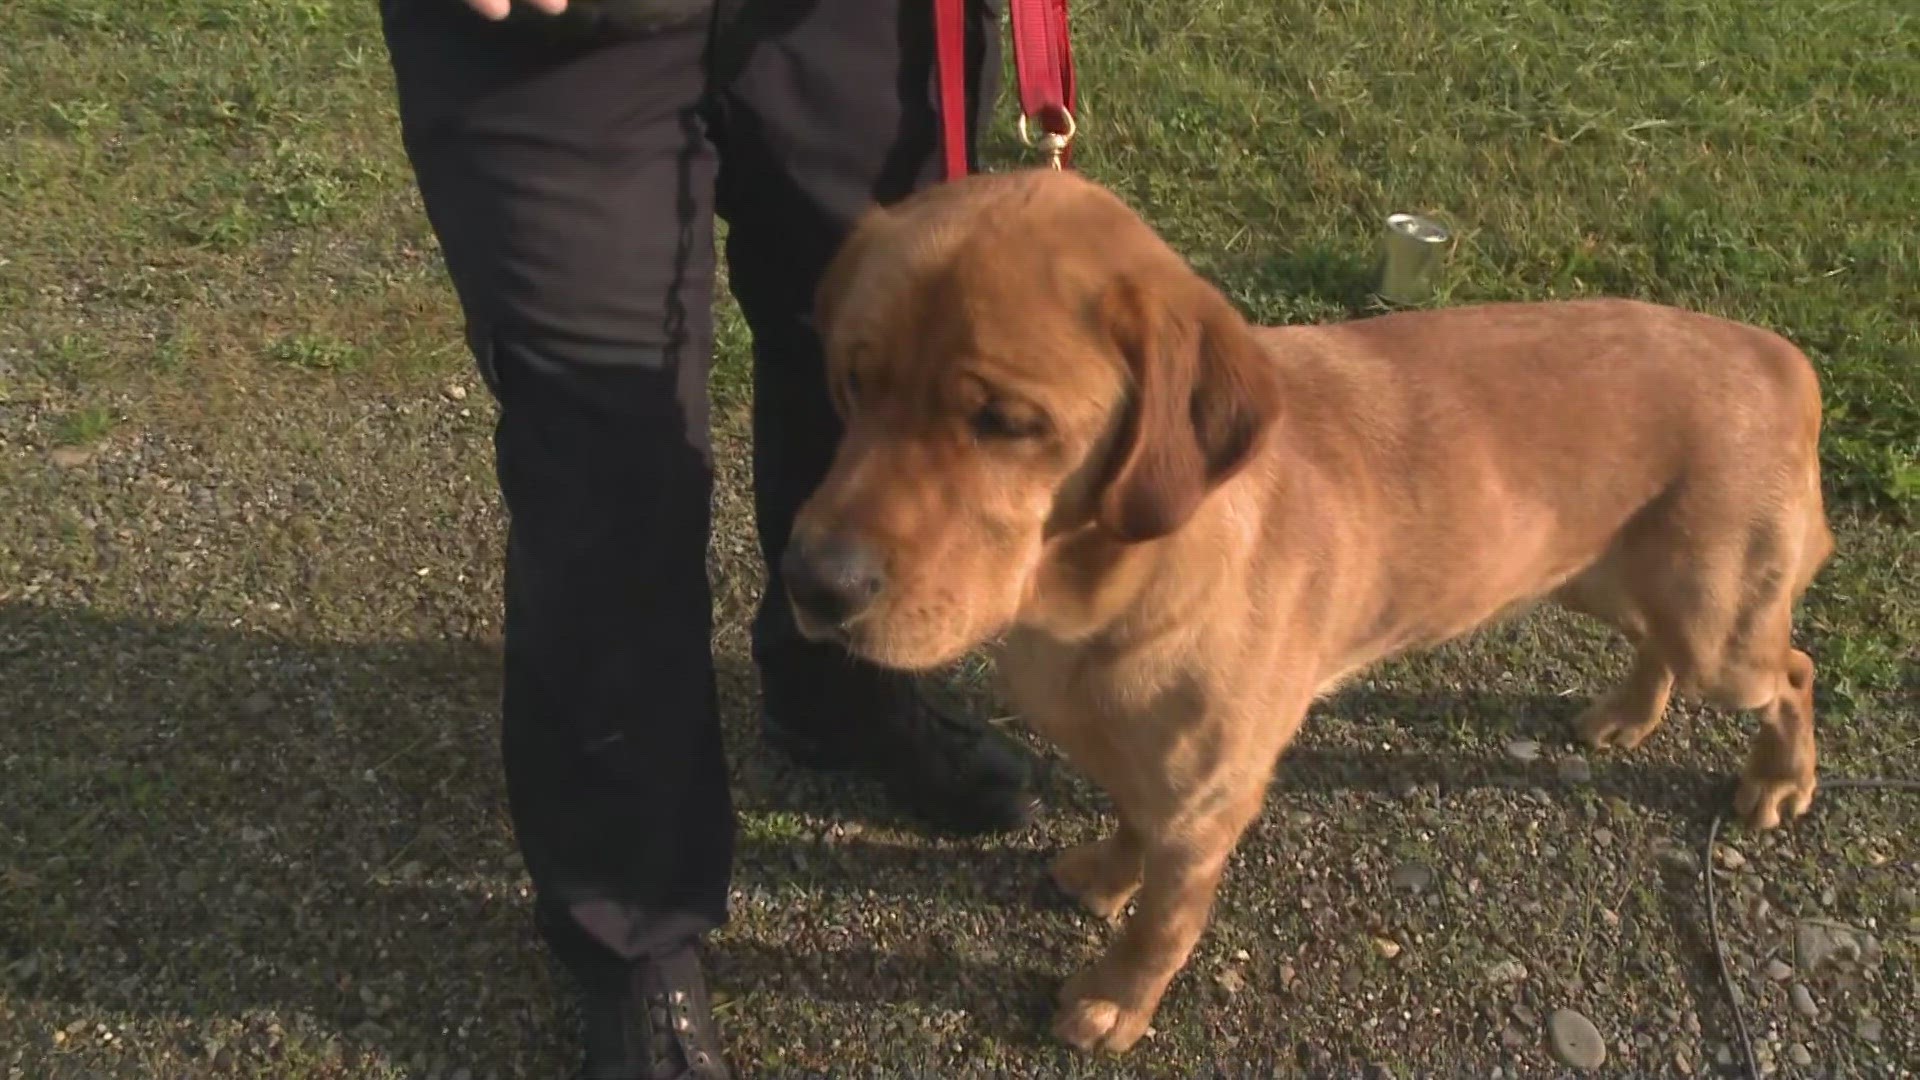 Cheeto is a 2-year-old yellow Lab mix. He will help Maine fire investigators track down the source of suspicious fires.